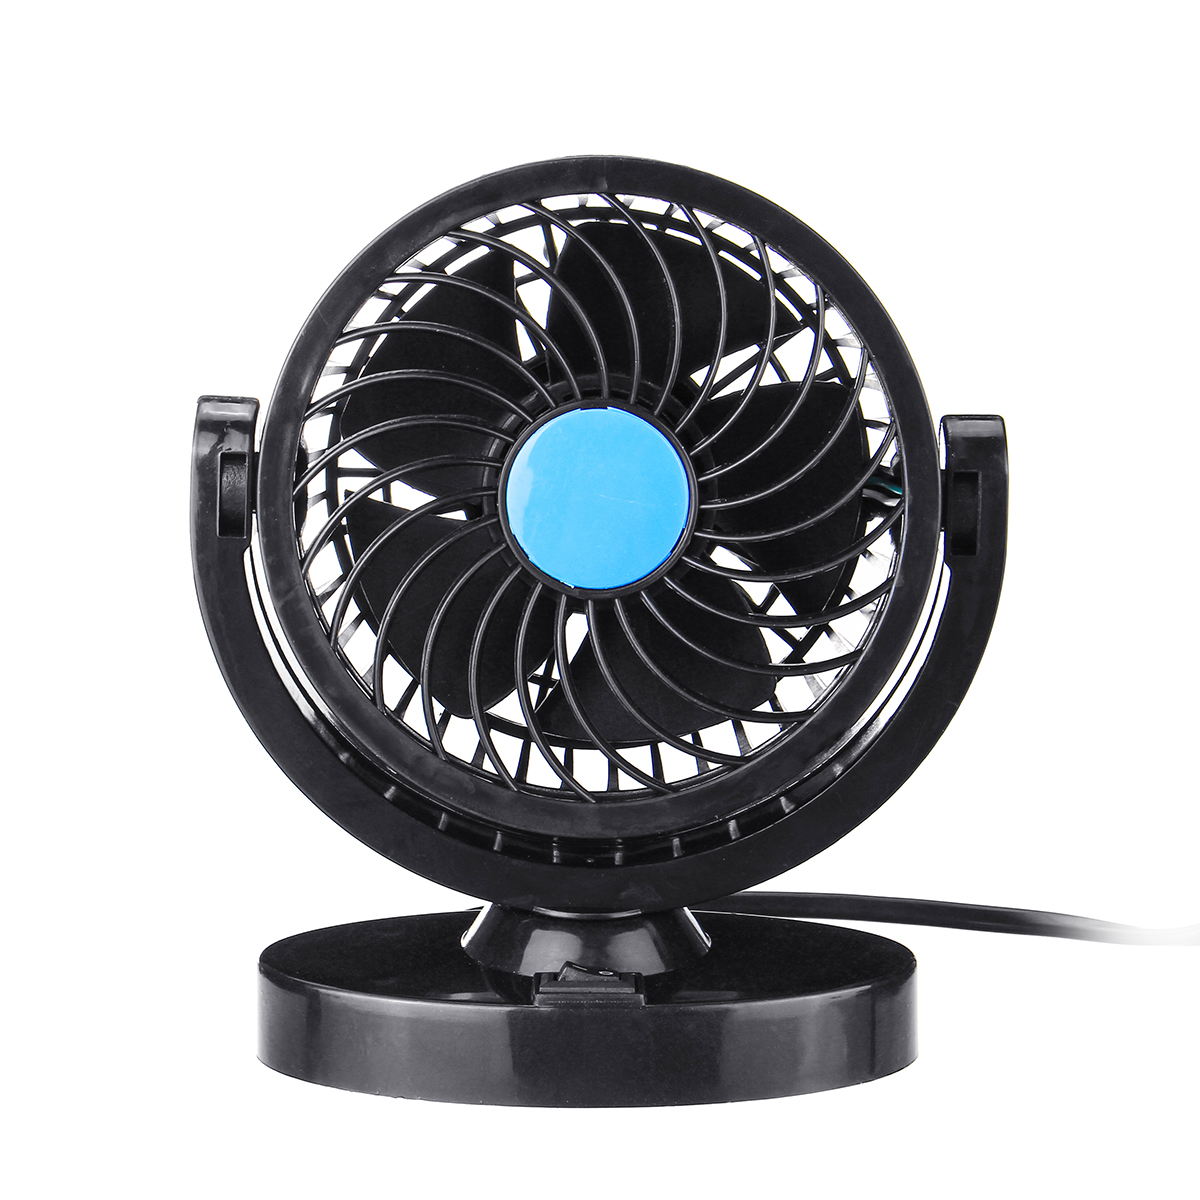 DC-12V24V-360deg-All-Round-Mini-Auto-Air-Cooling-Fan-Adjustable-Low-Noise-1466573-5